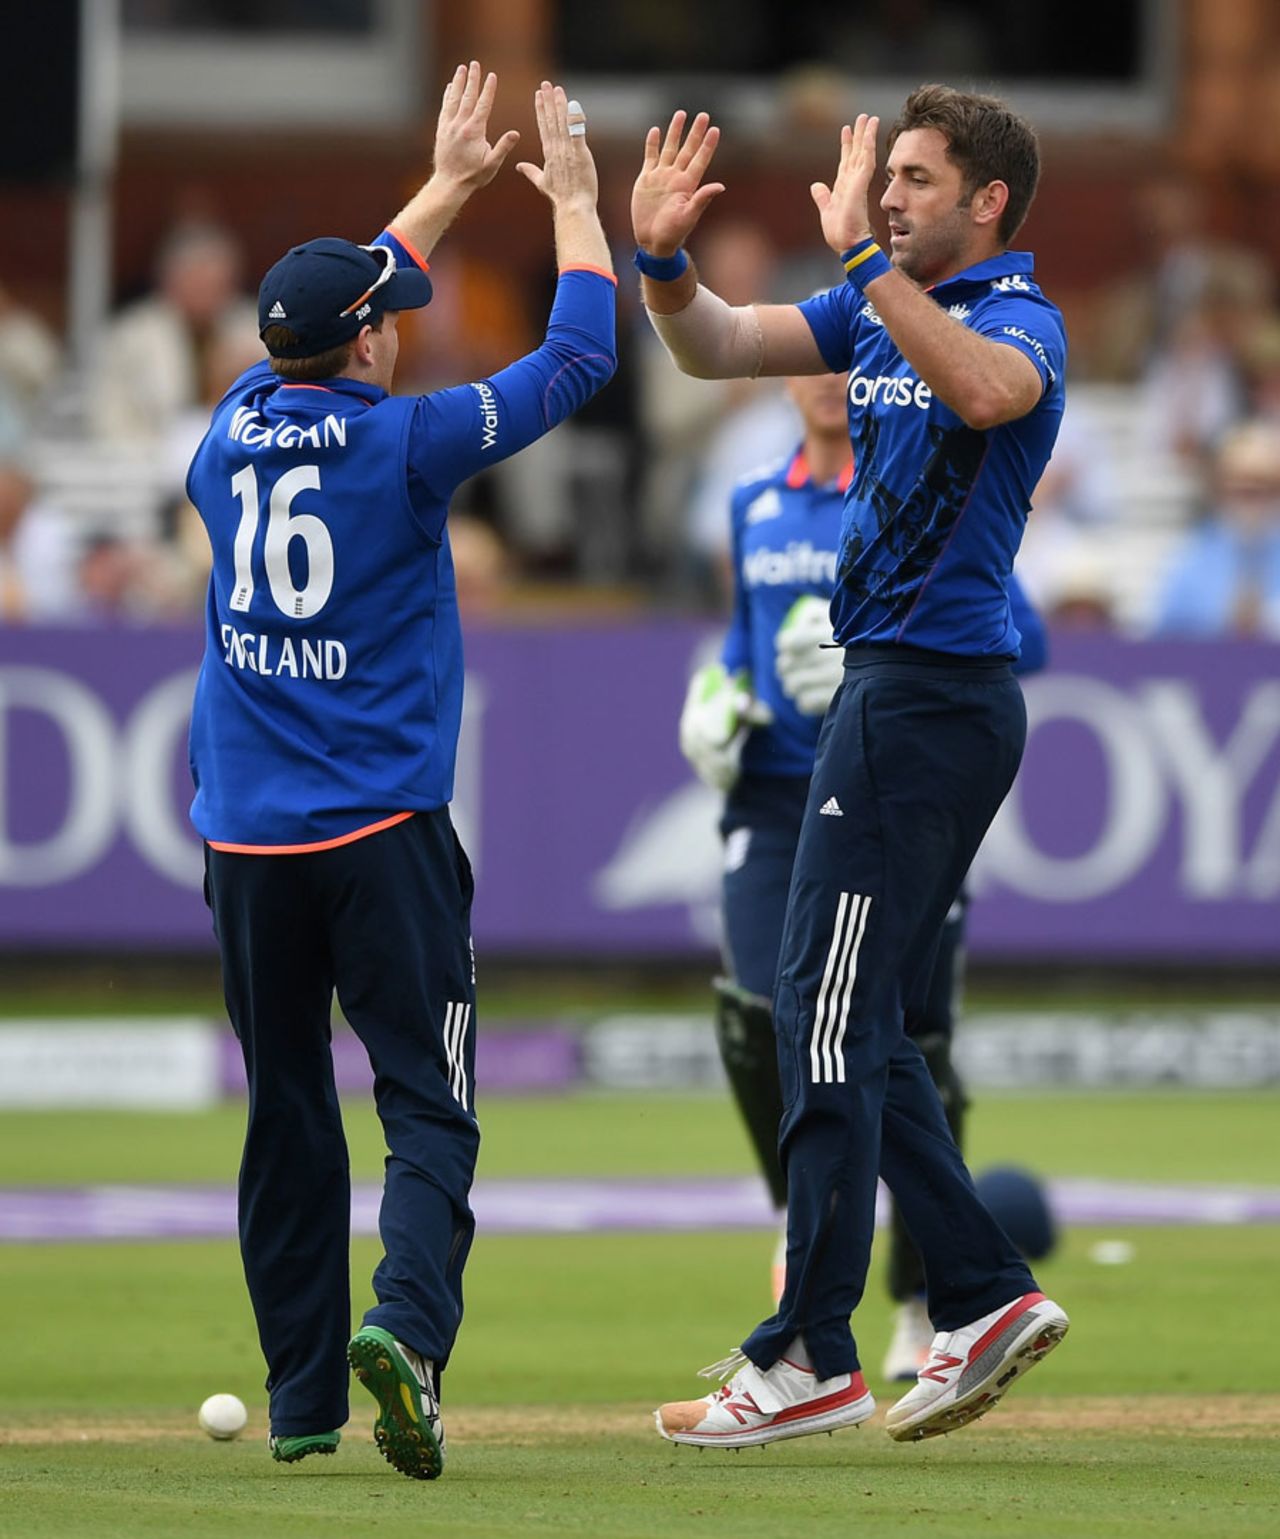 Liam Plunkett restored England's dominance with the wicket of Babar Azam, England v Pakistan, 2nd ODI, Lord's, August 27, 2016